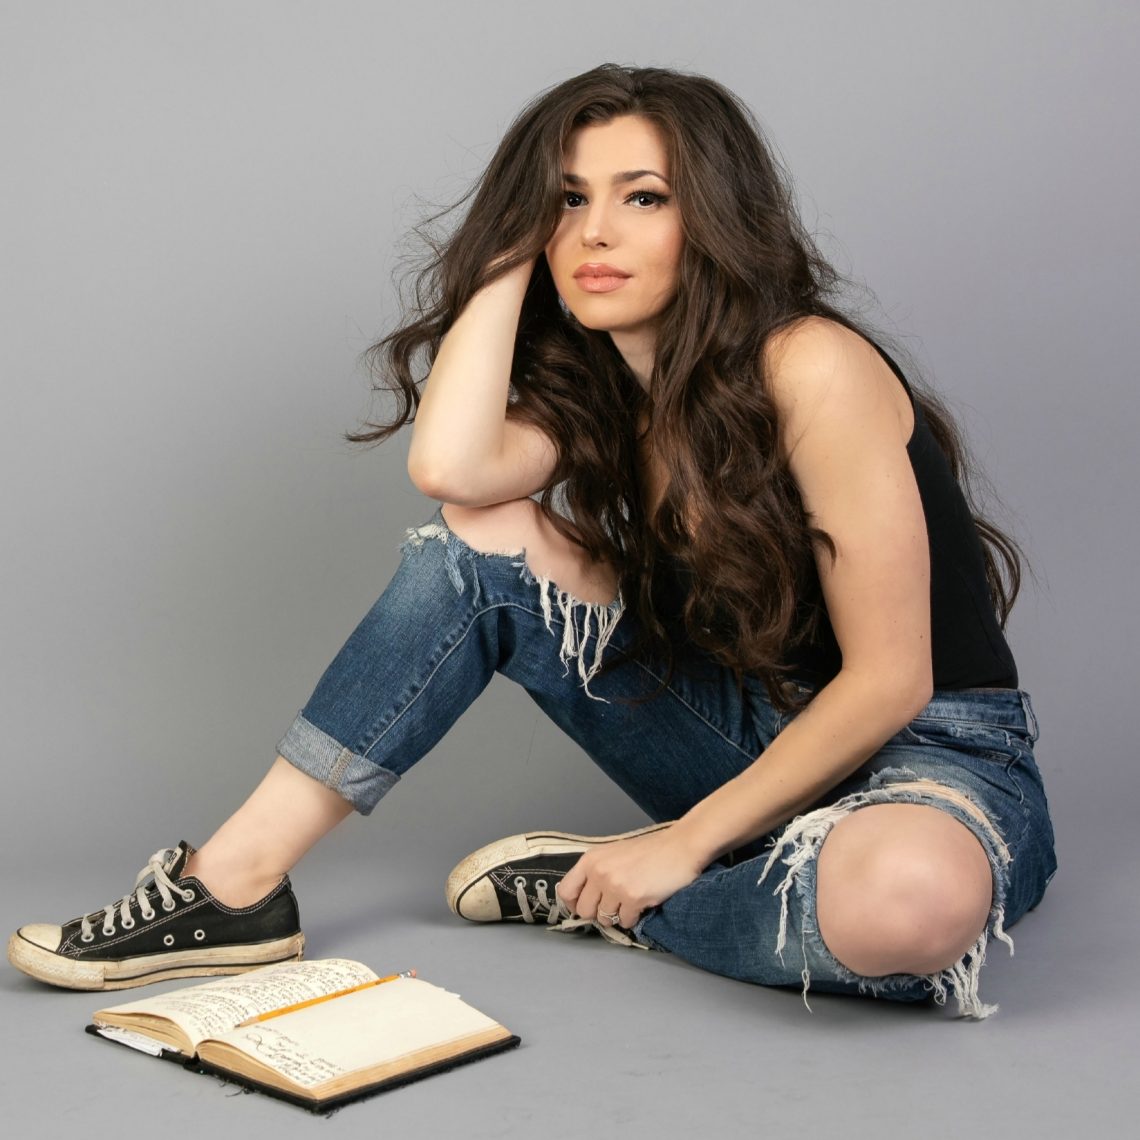 It’s Now or Never – Jessica Lynn Releases Her Latest Single